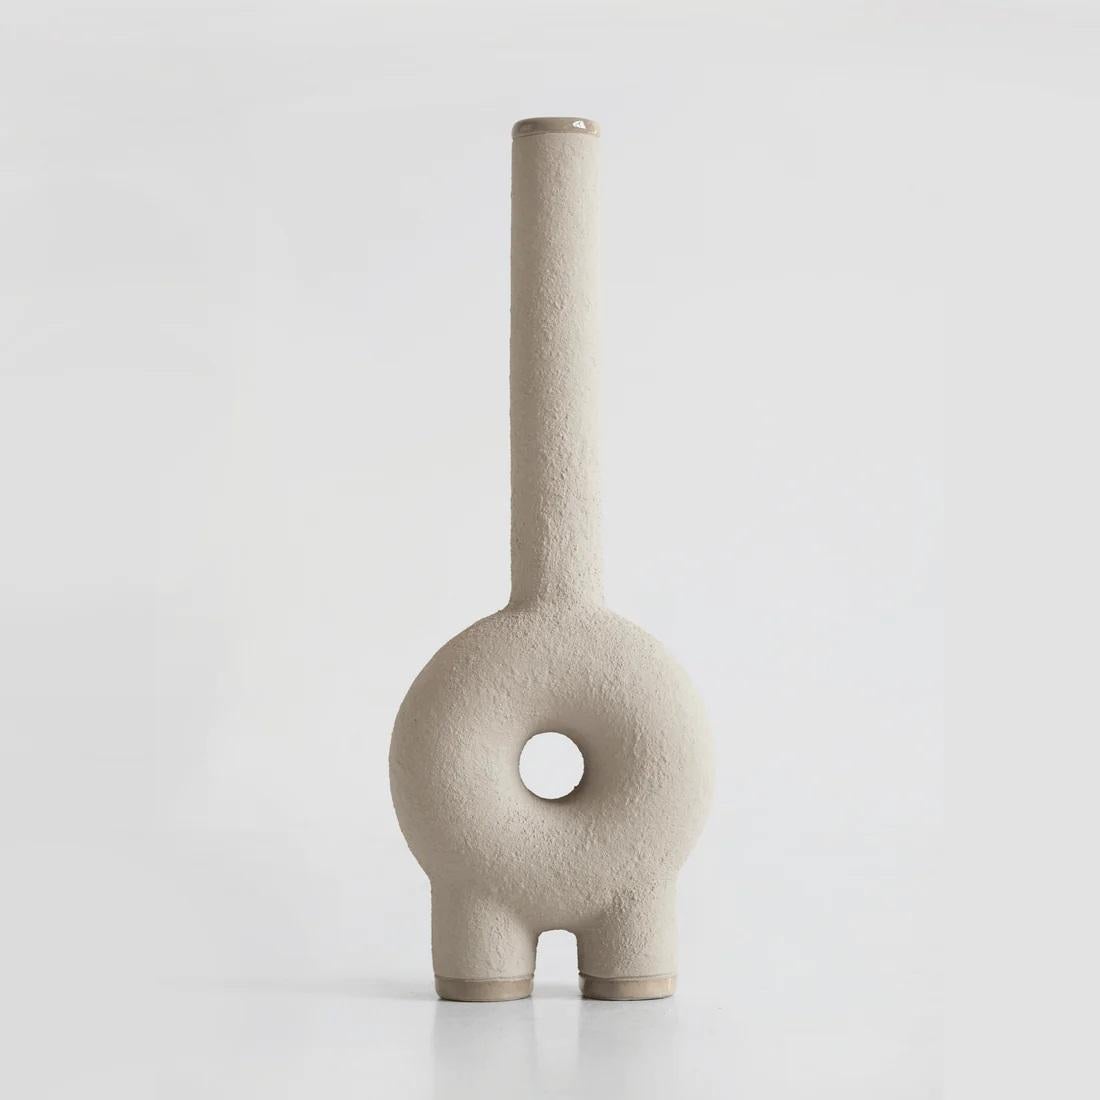 Long neck ceramic vase by Faina
Design: Victoriya Yakusha
Materials: ceramic.
Dimensions: L 10 x W 5 x H 38 cm

In search of new-old design messages, Victoria Yakusha conducted a study of the daily traditions of our ancestors. The times of